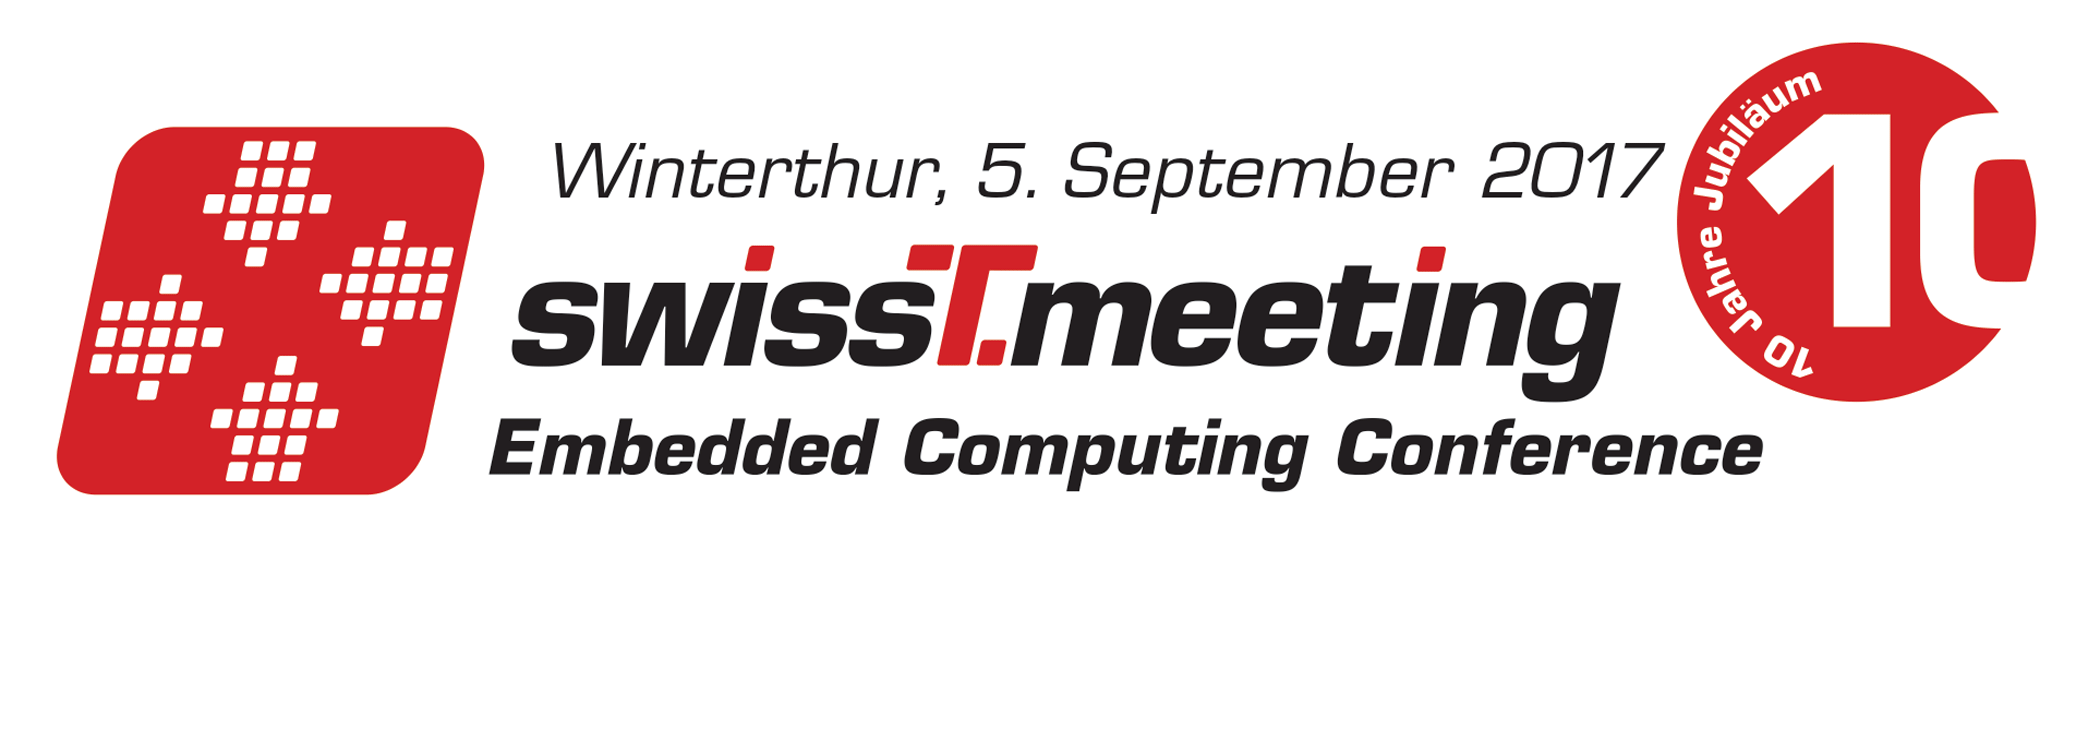 Embedded Computing Conference